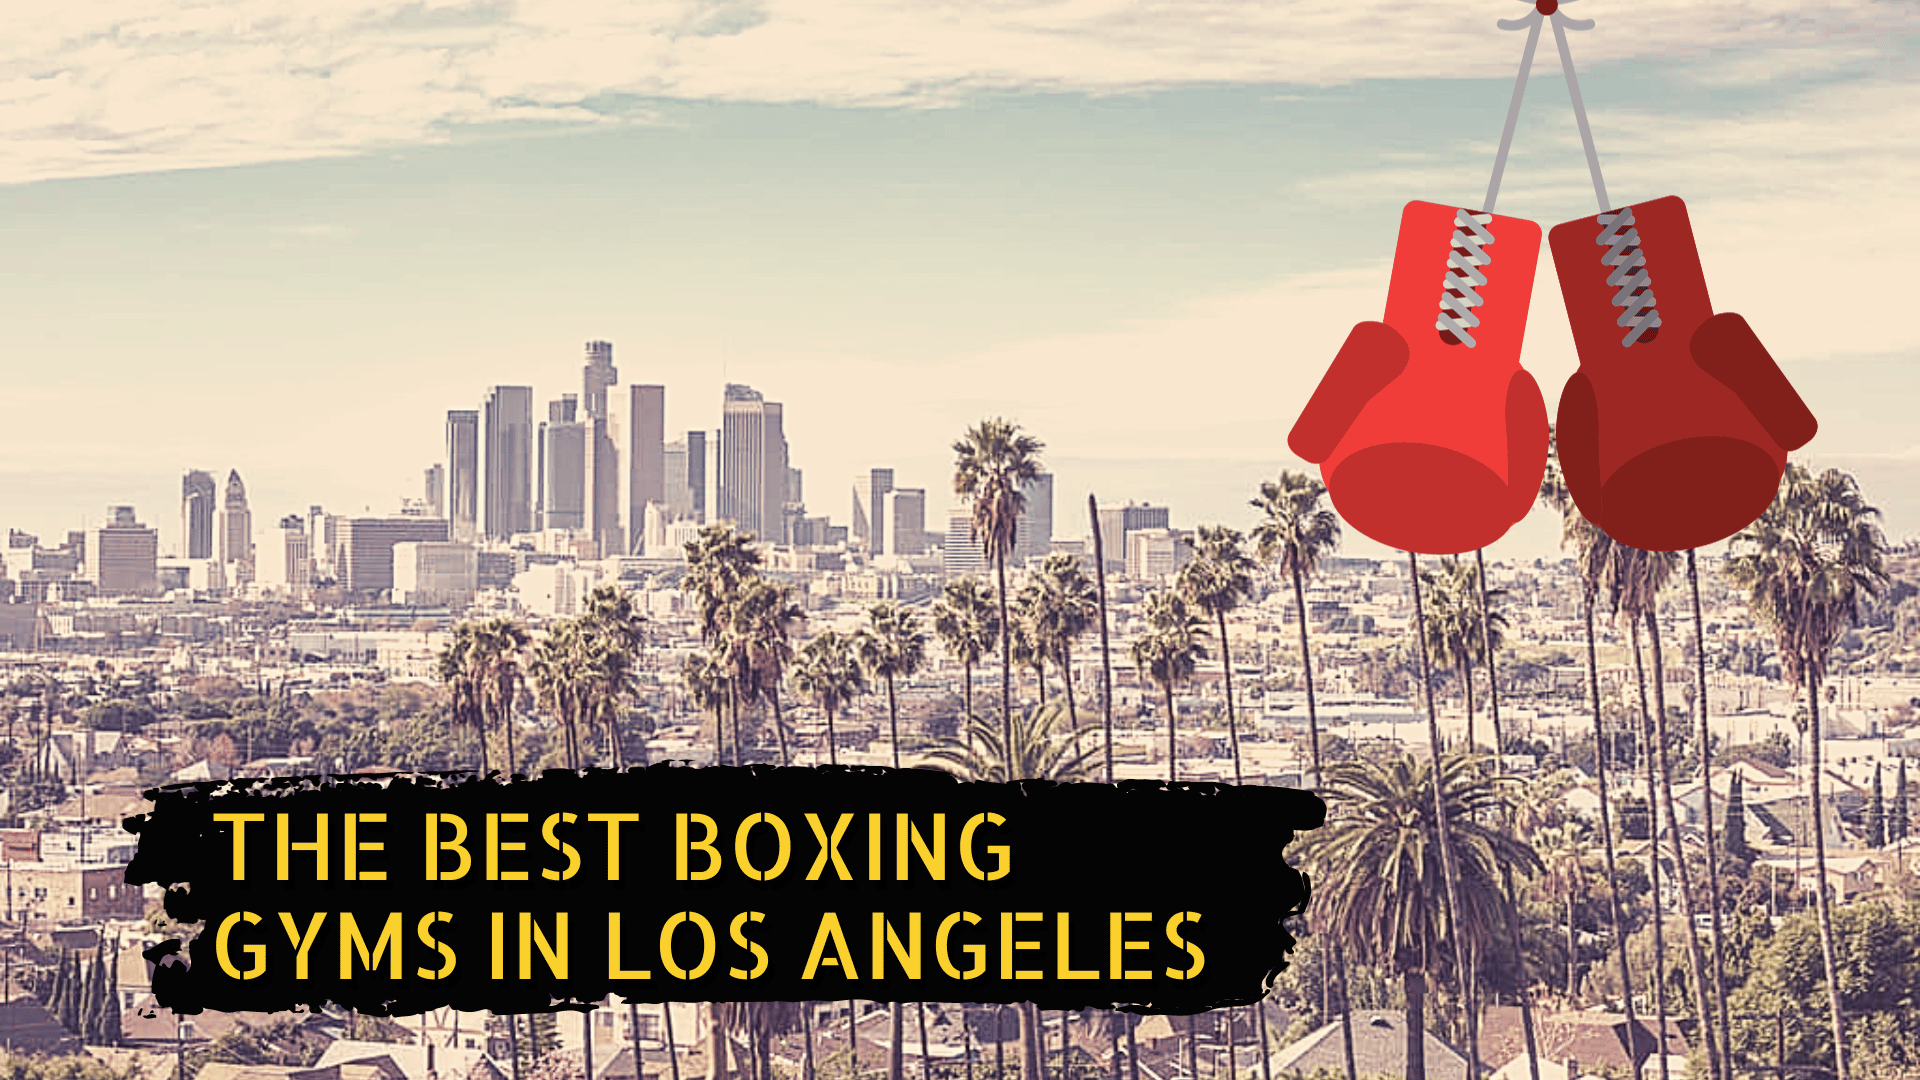 Los Angeles skyline, some boxing gloves, and the title the best boxing gyms in Los Angeles